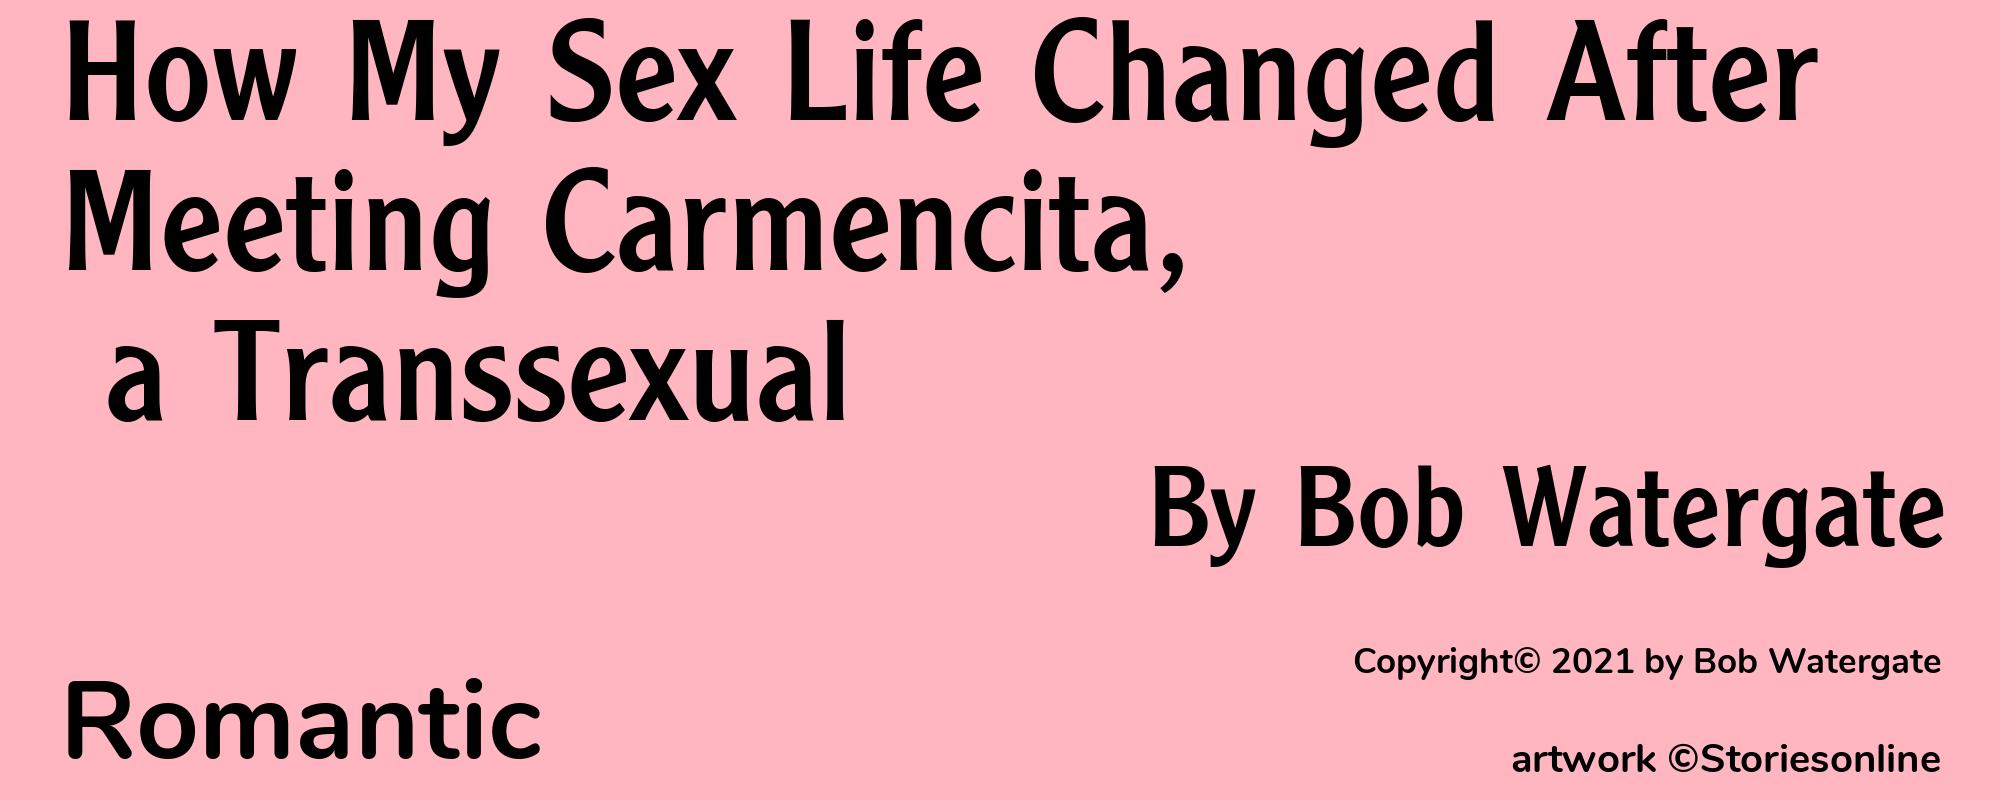 How My Sex Life Changed After Meeting Carmencita, a Transsexual - Cover